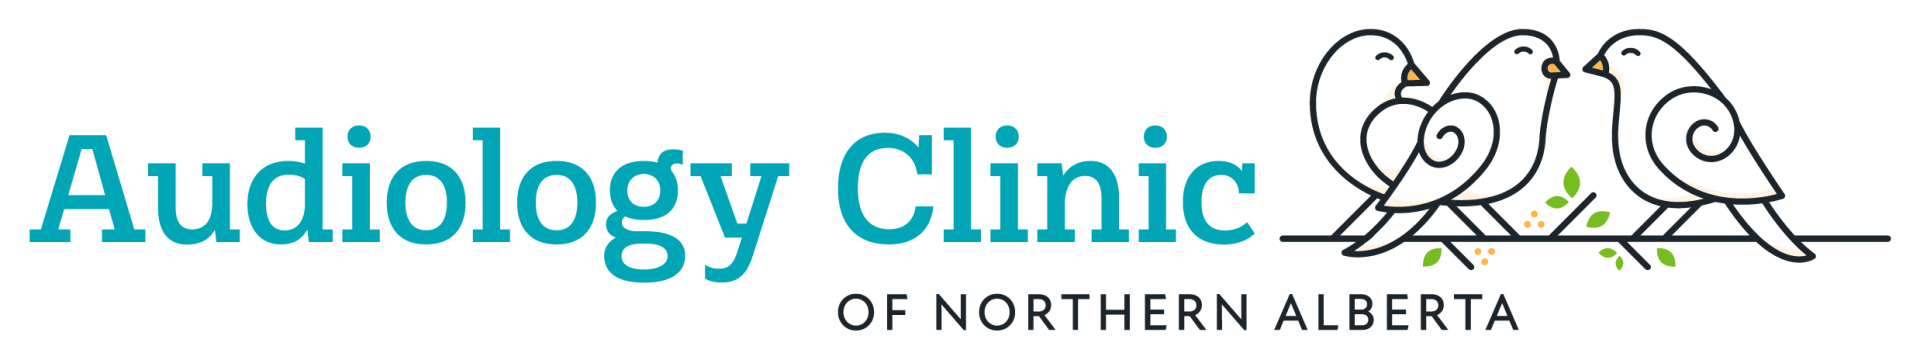 Audiology Clinic of Northern Alberta